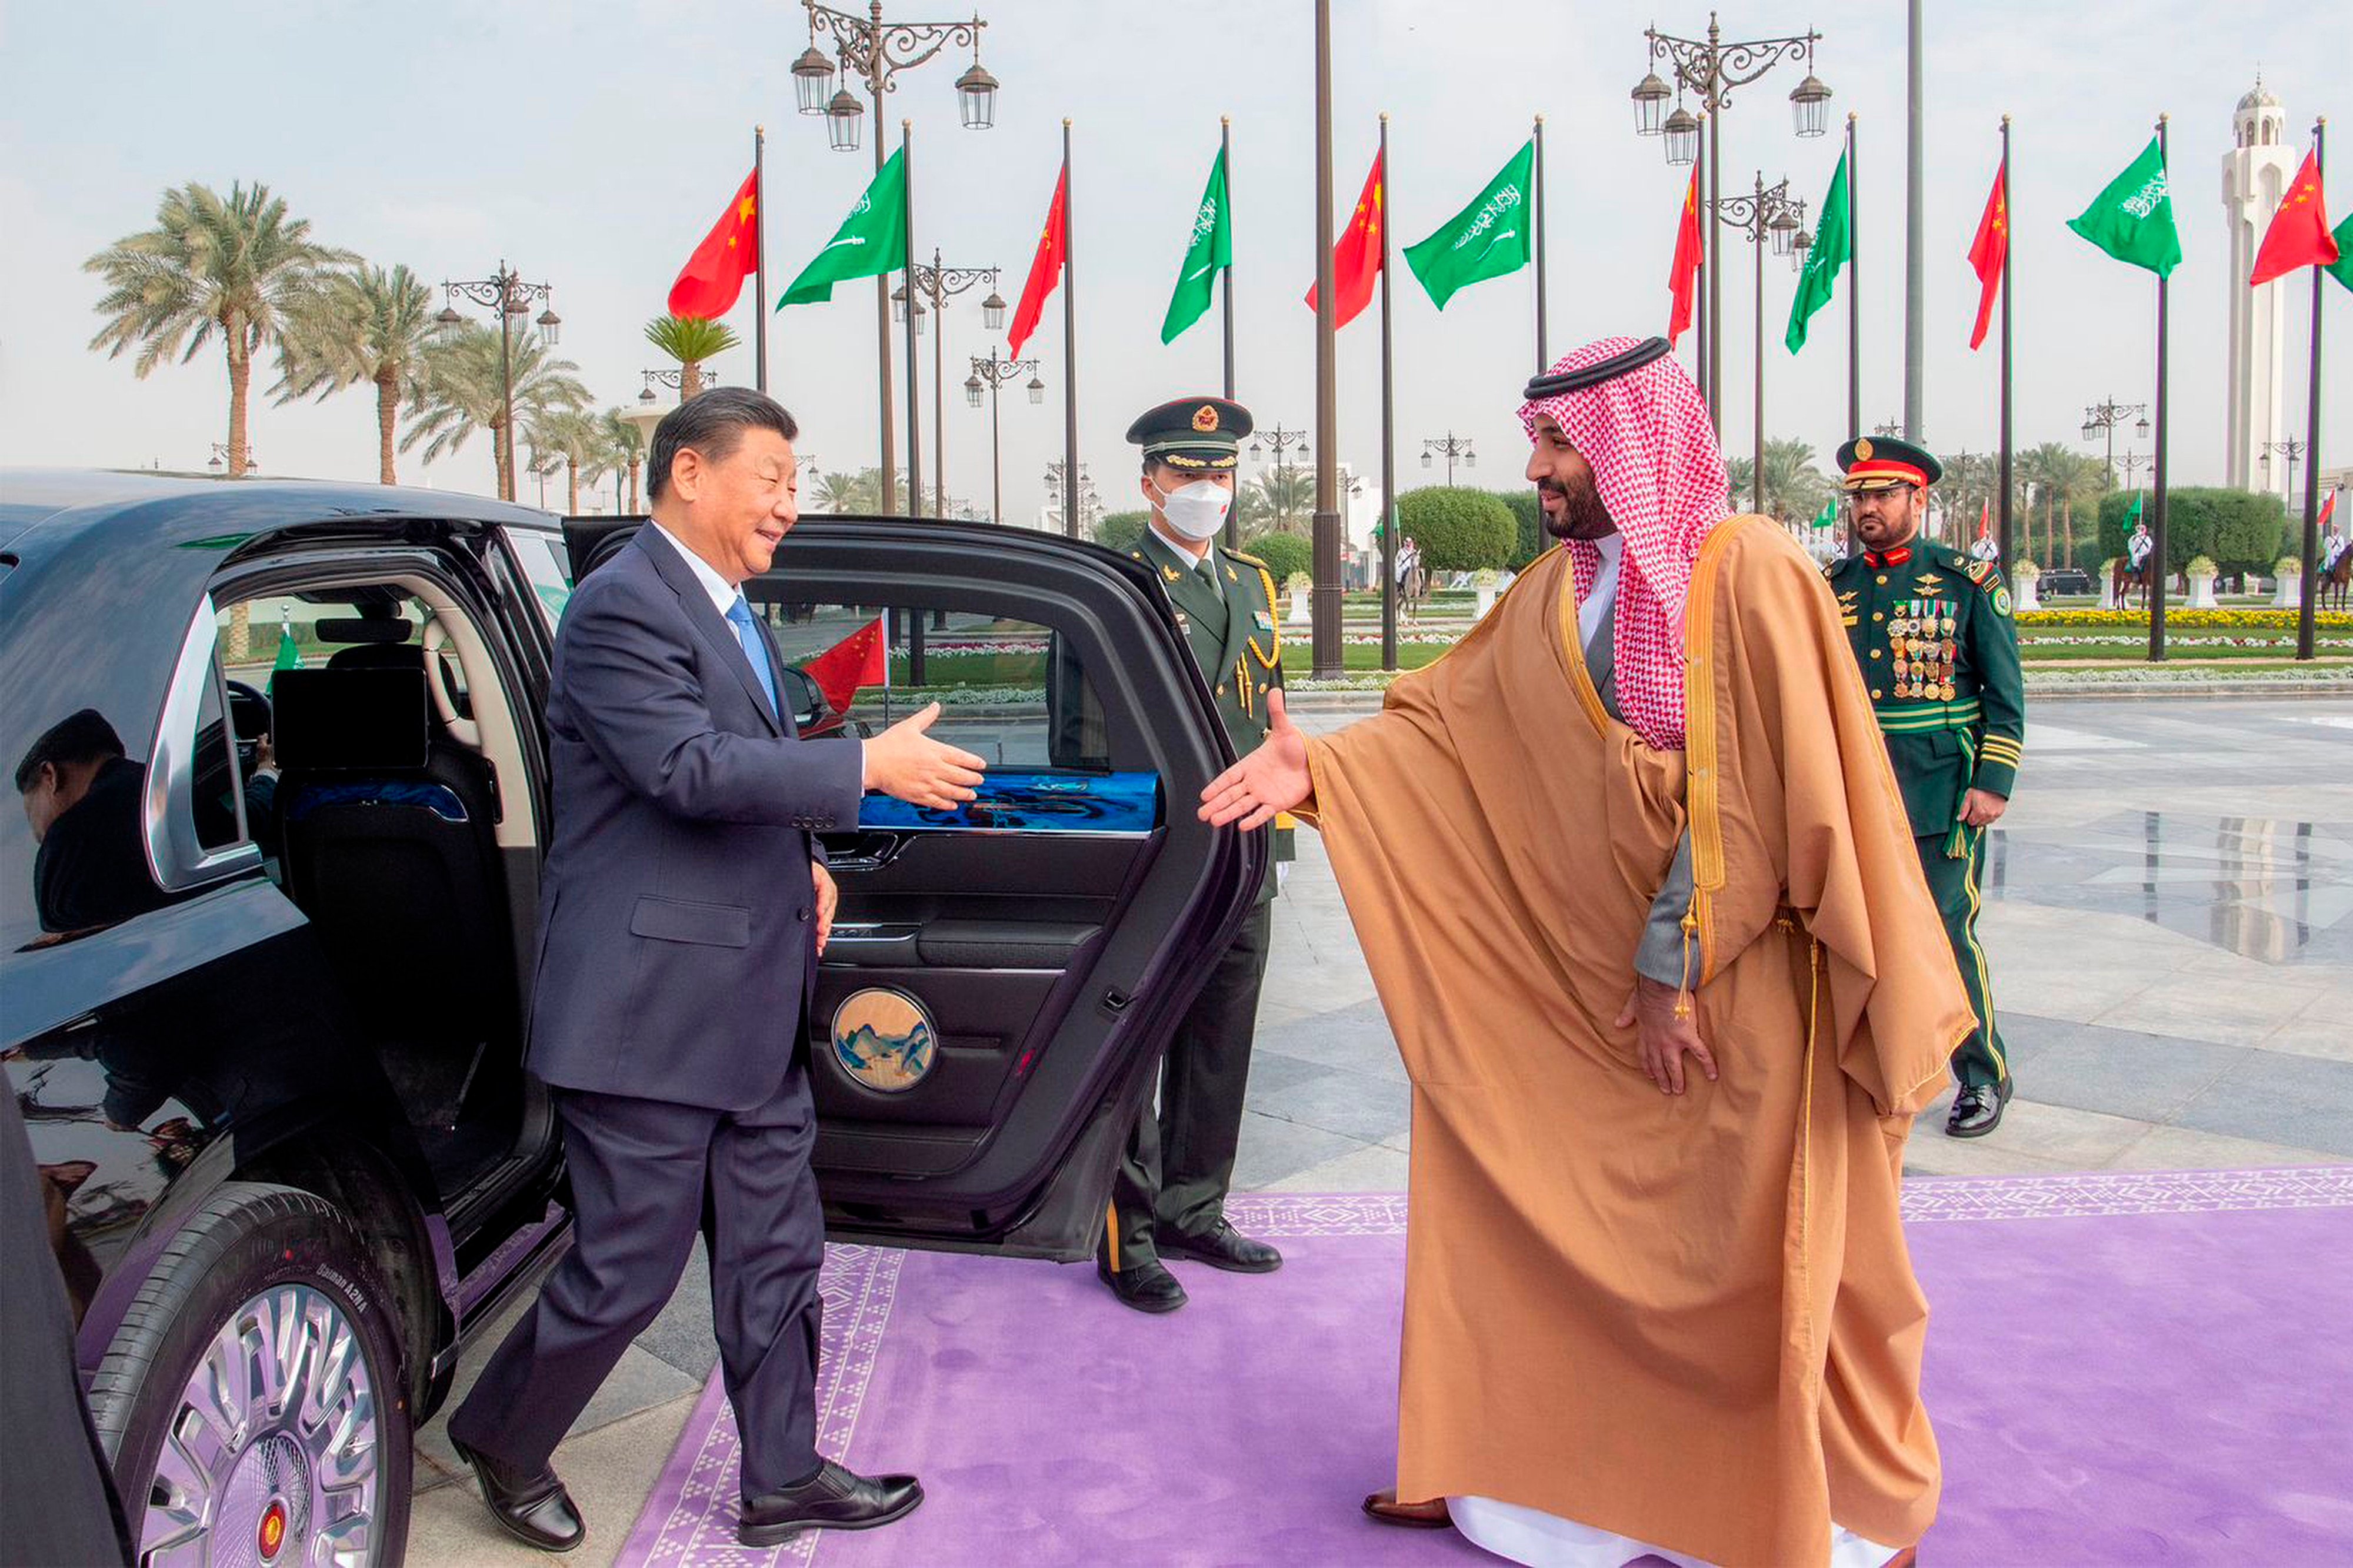 President Xi Jinping is greeted by Saudi Crown Prince Mohammed bin Salman after his arrival in Riyadh on December 8, 2022. China’s recent rise in engagement with the Middle East is part of a larger diplomatic push to portray itself as a force for peace. Photo: Saudi Press Agency via AP